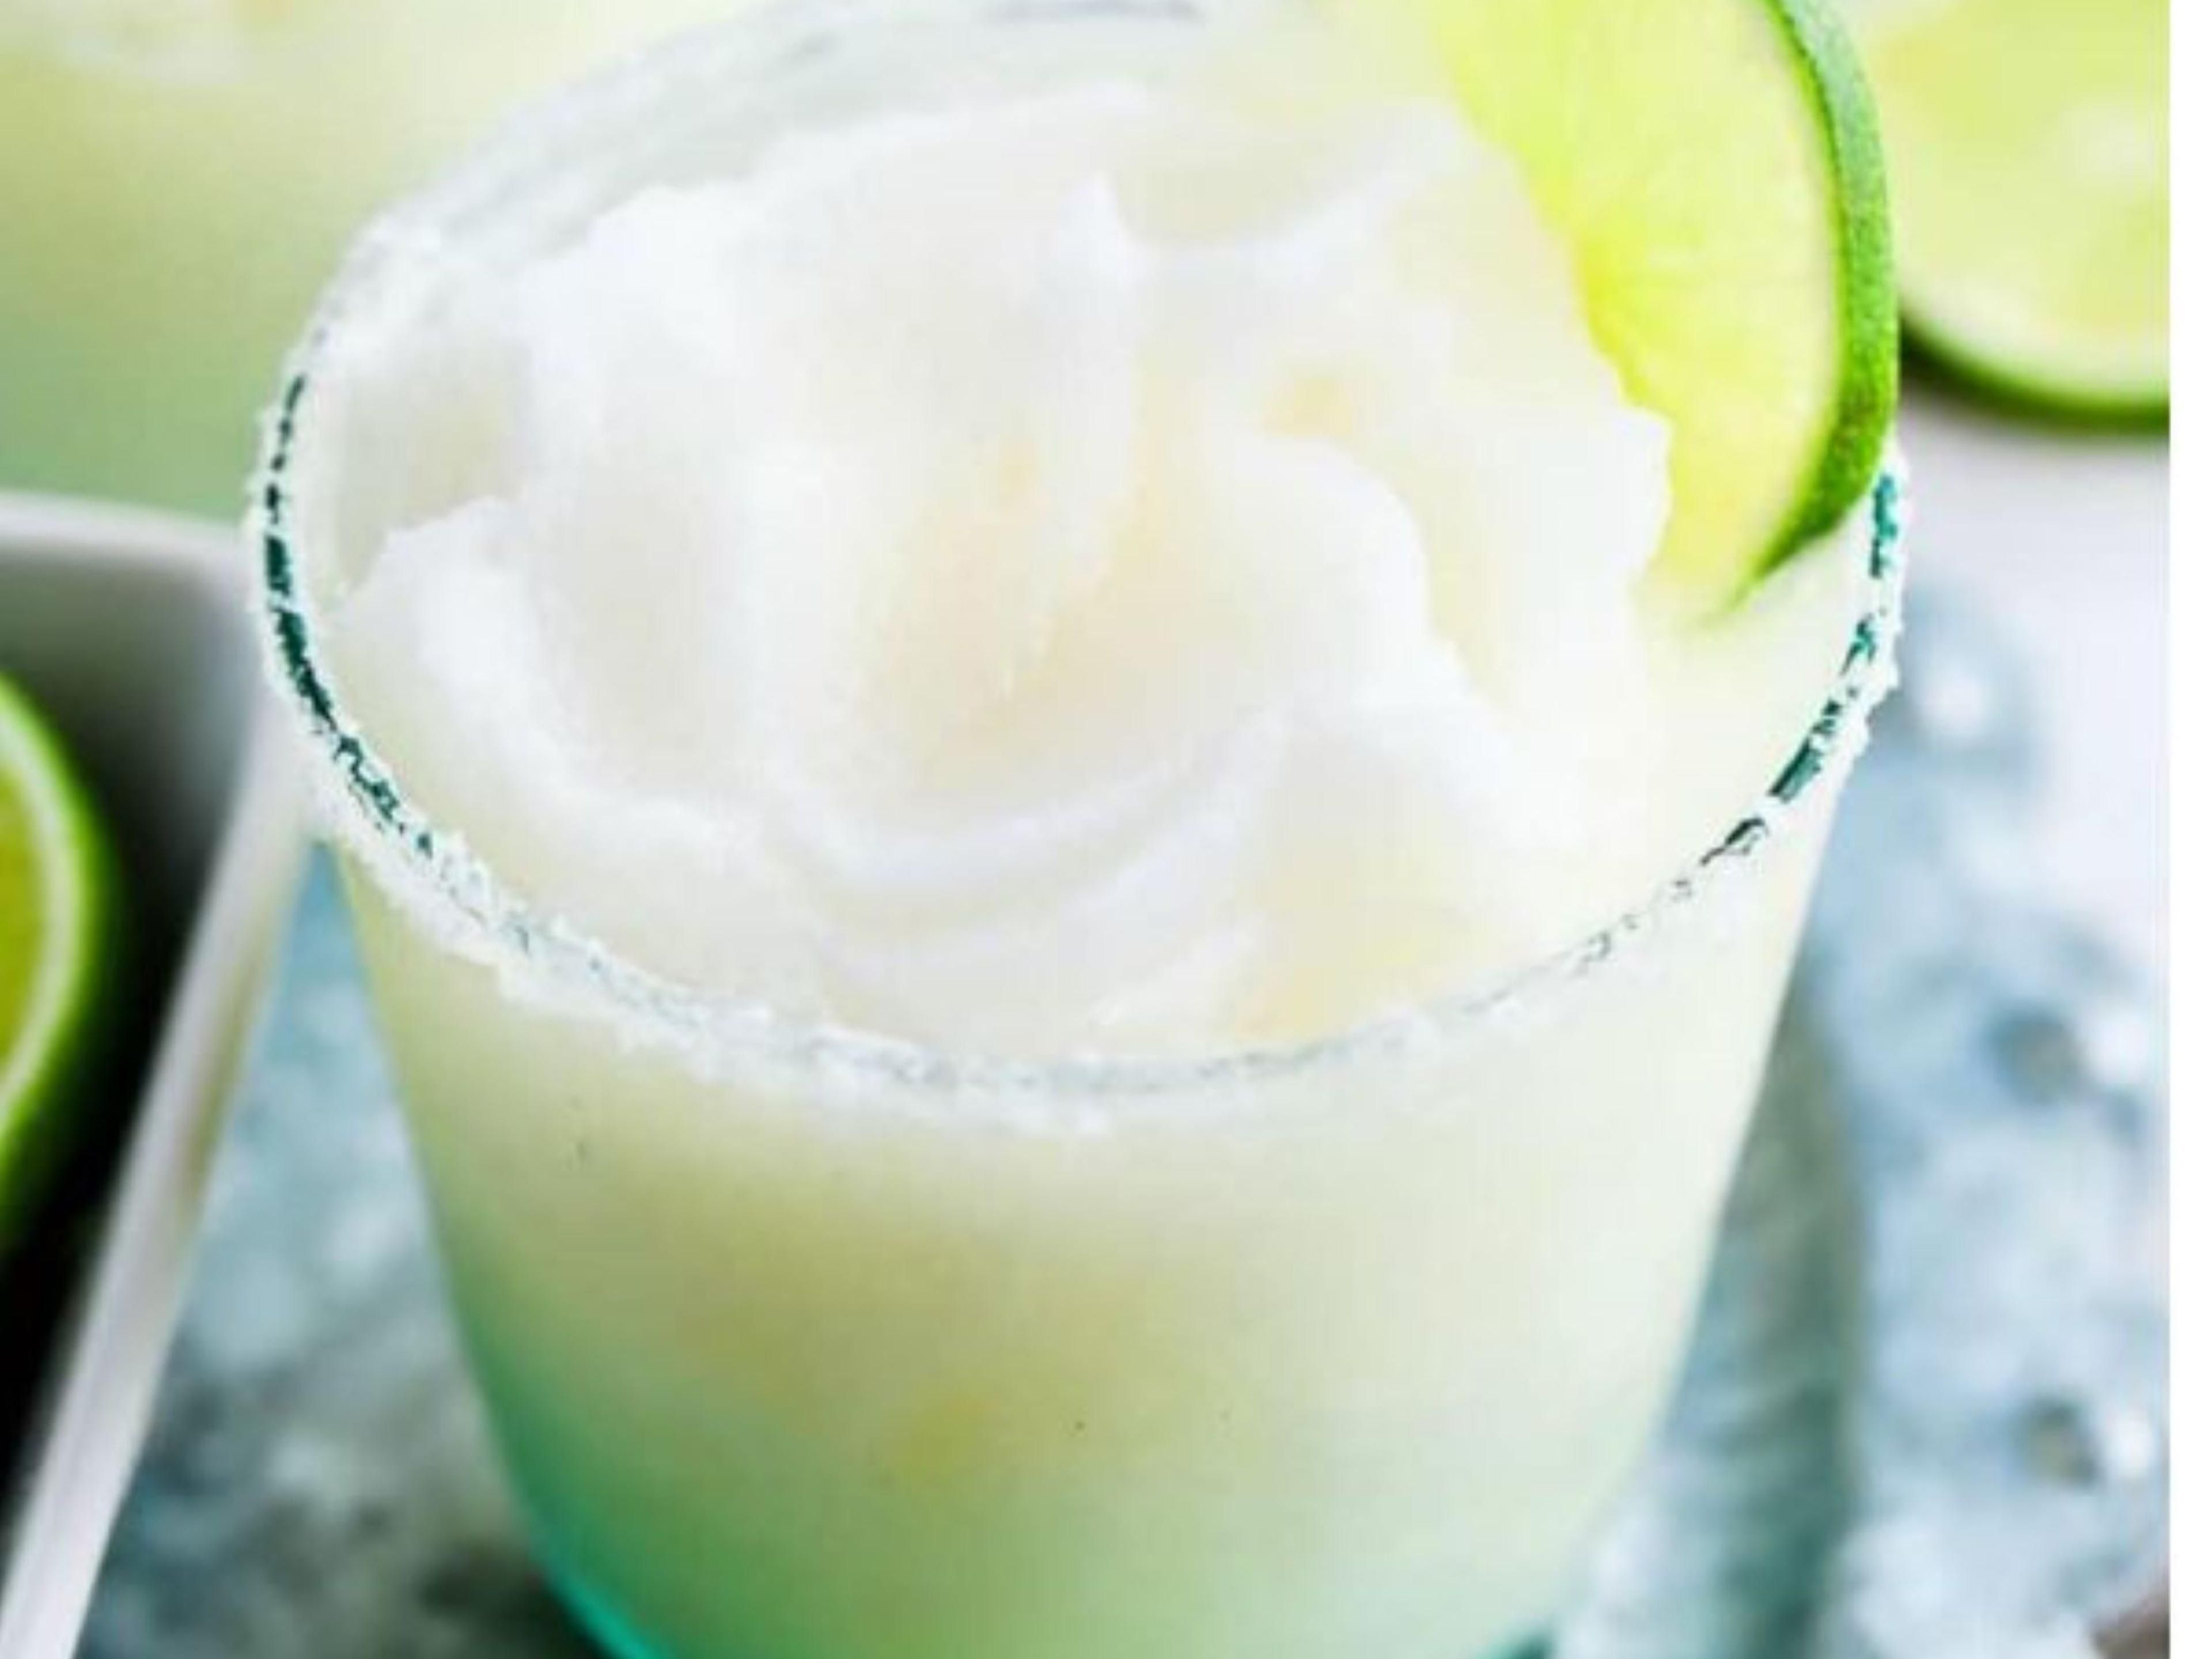 IHG Members get 50% off Frozen Margaritas. Please see Carlos or Rick at the bar for more details.